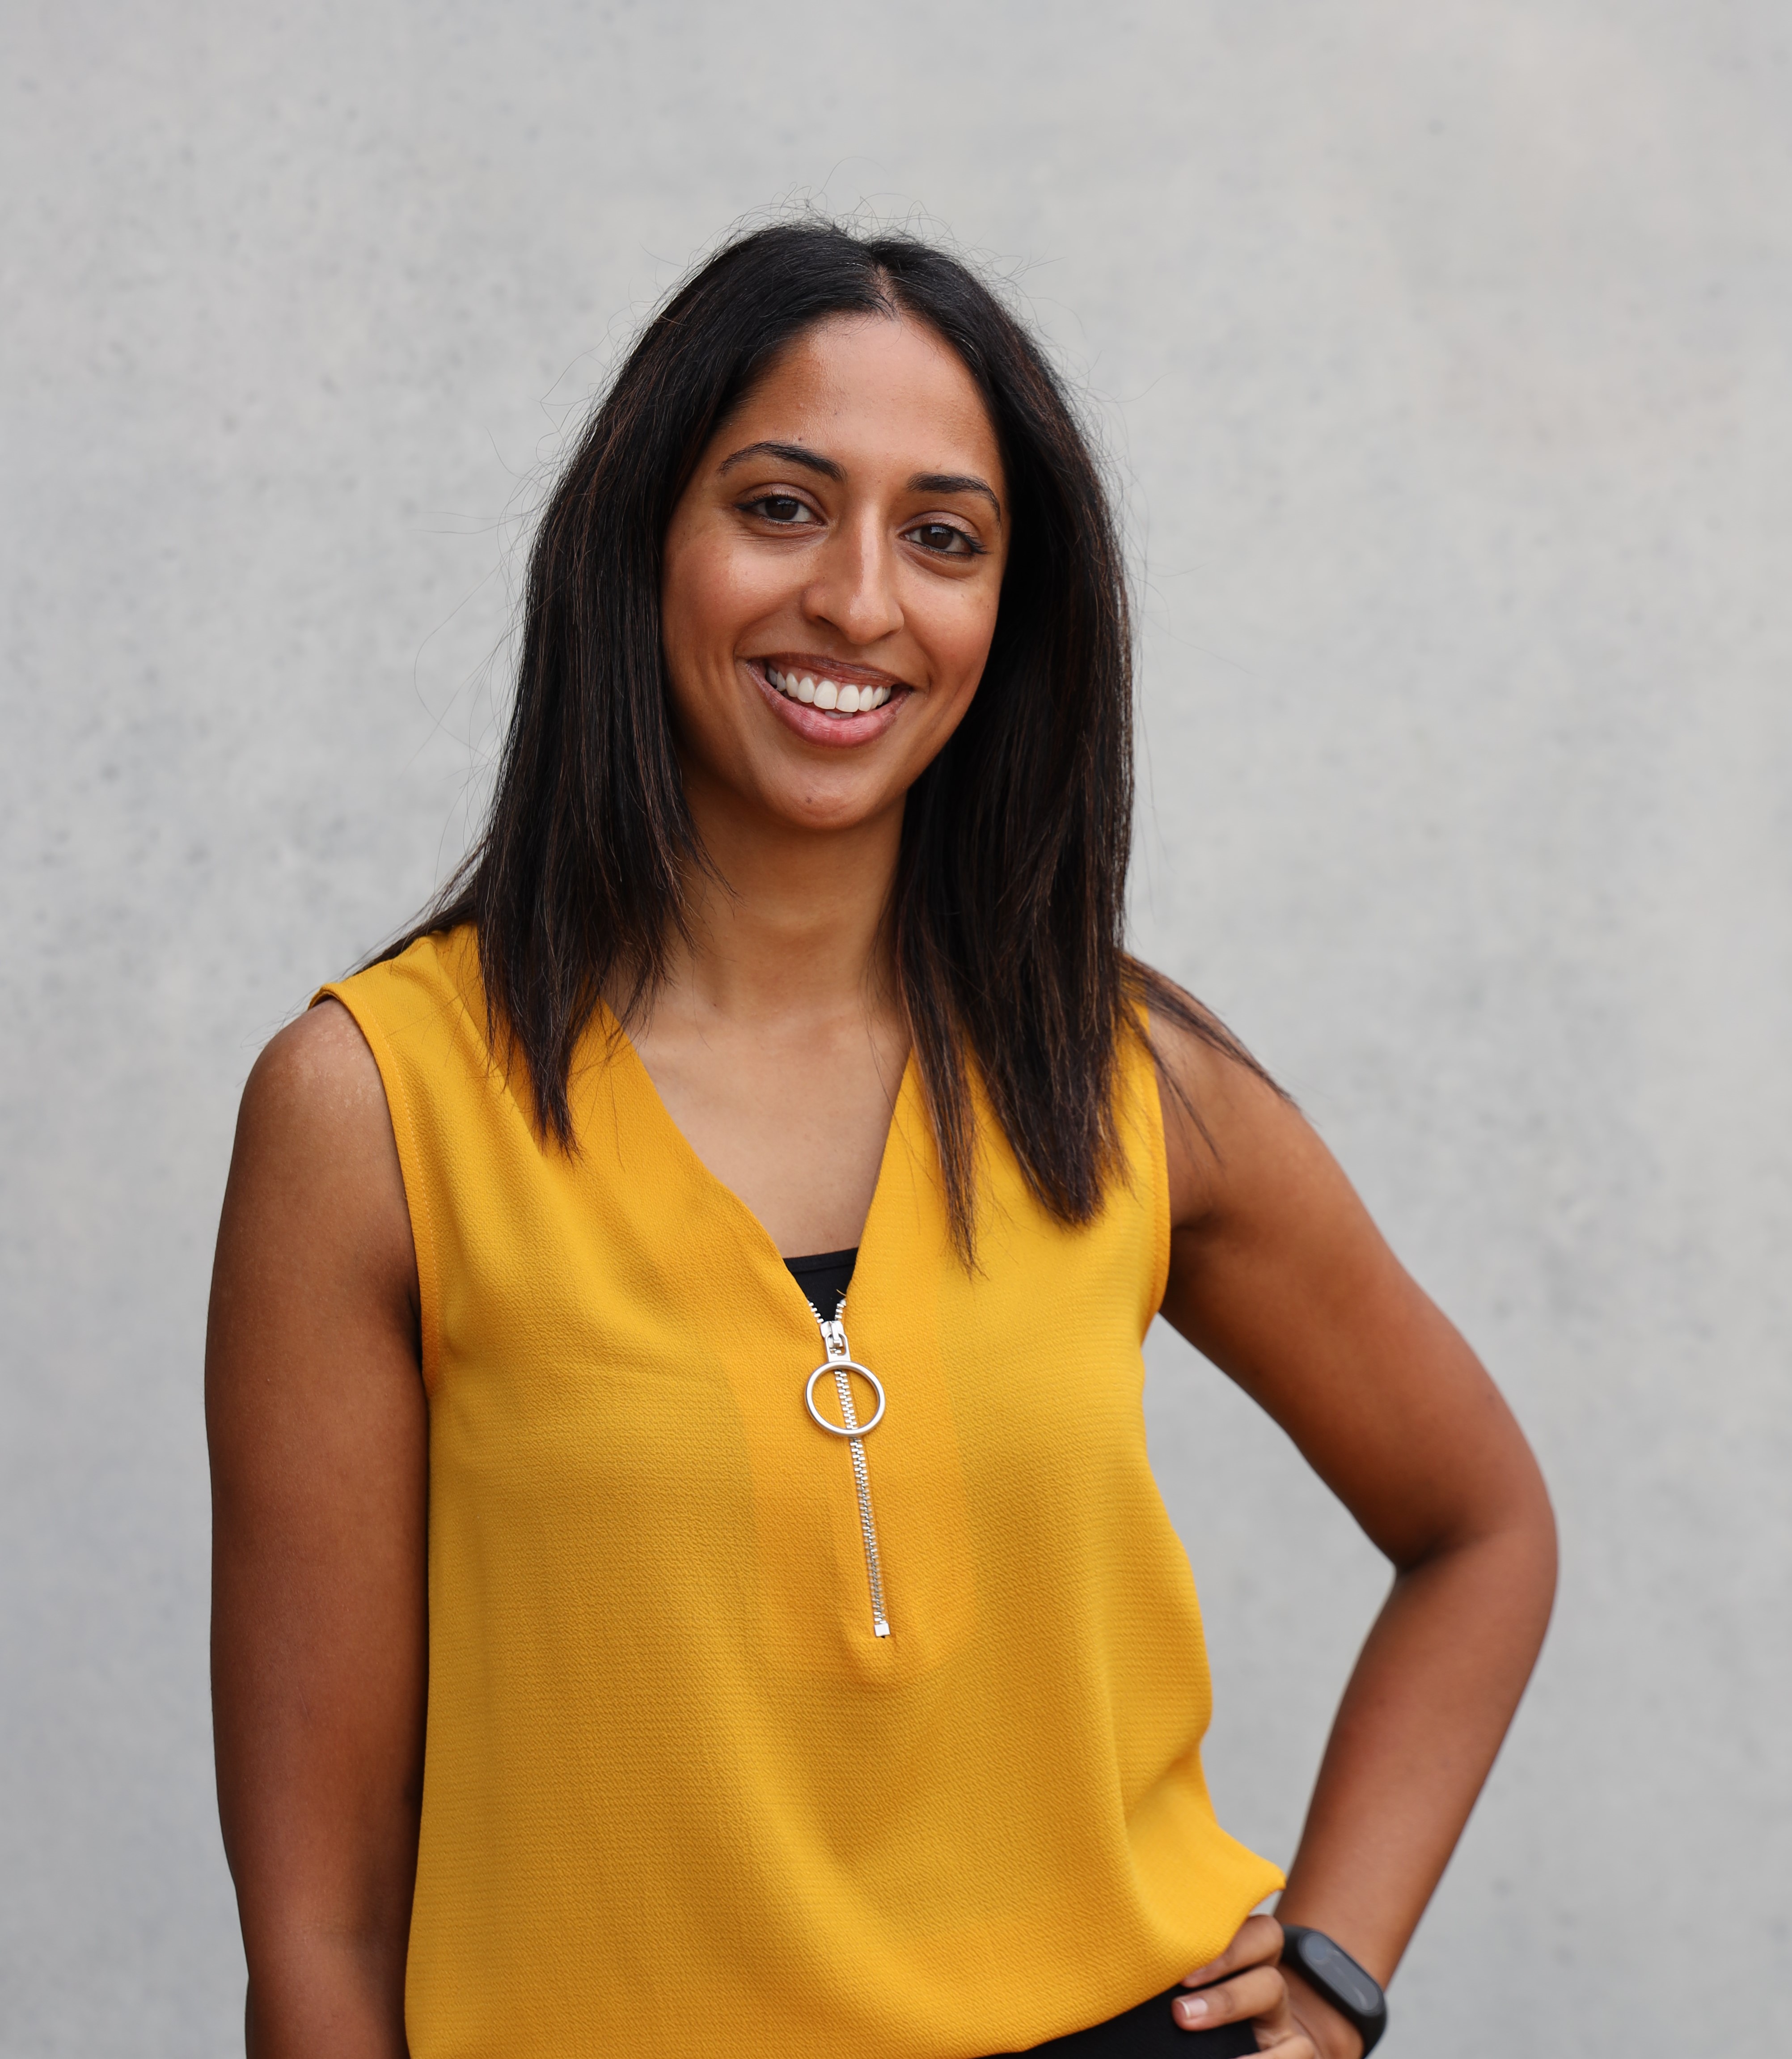 Farhanah Jeewa standing in front of a grey background wearing a bright yellow top, smiling and with her hand on her hip.